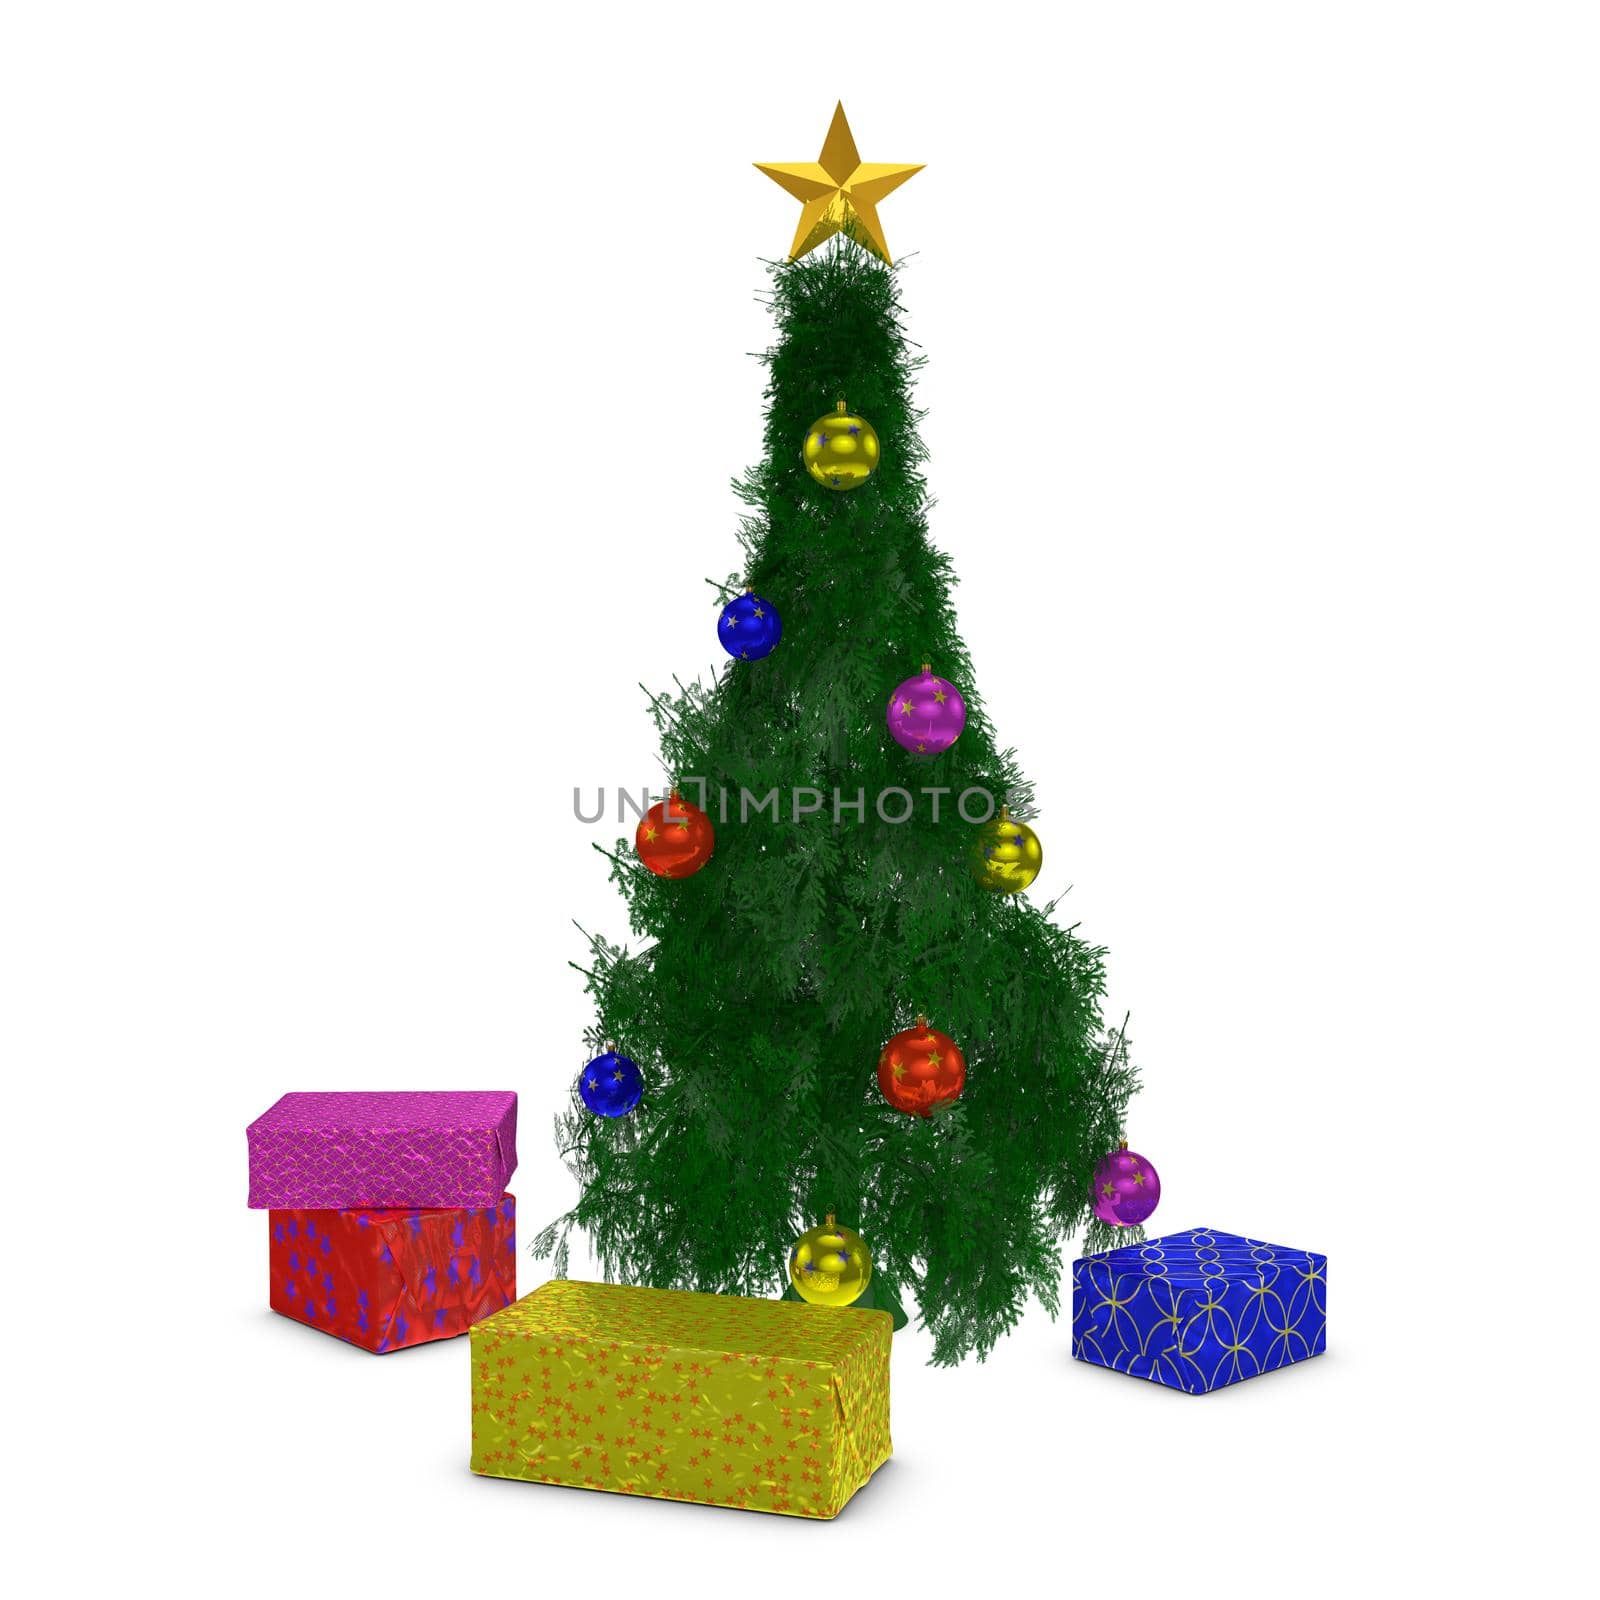 Christmas gifts near a Christmas tree, 3d render